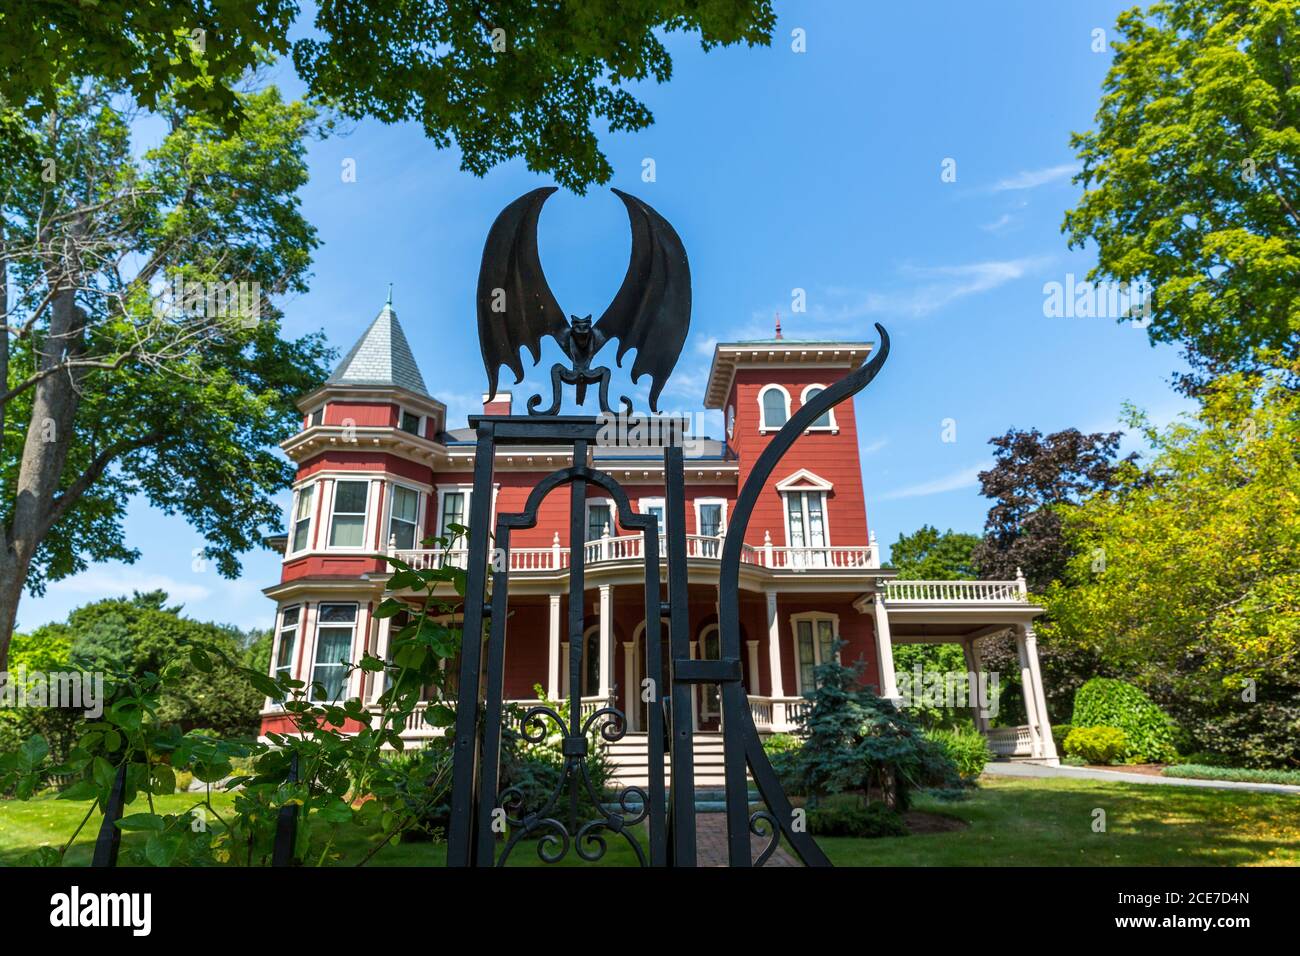 Caption Bangor, USA - 27th August 2014: Detail of the gate and house of Stephen King, in Bangor, Maine, USA. Stephen King is famous as an author of ho Stock Photo